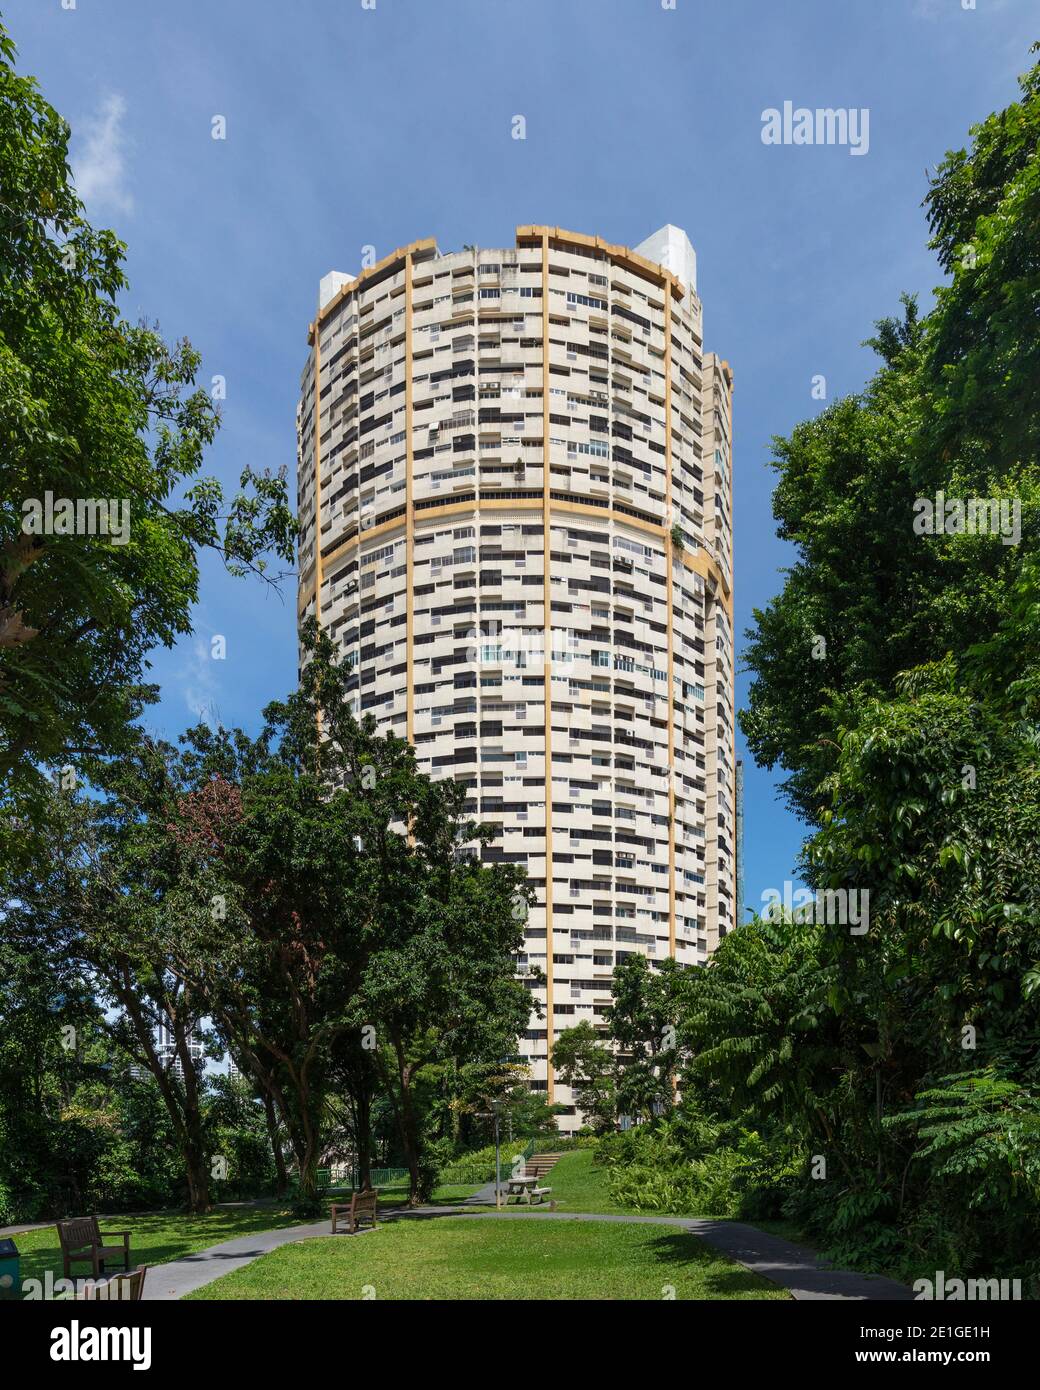 Pearl Bank Apartments is a high-rise private residential building on Pearl's Hill in Outram, near the Chinatown area of Singapore. Stock Photo